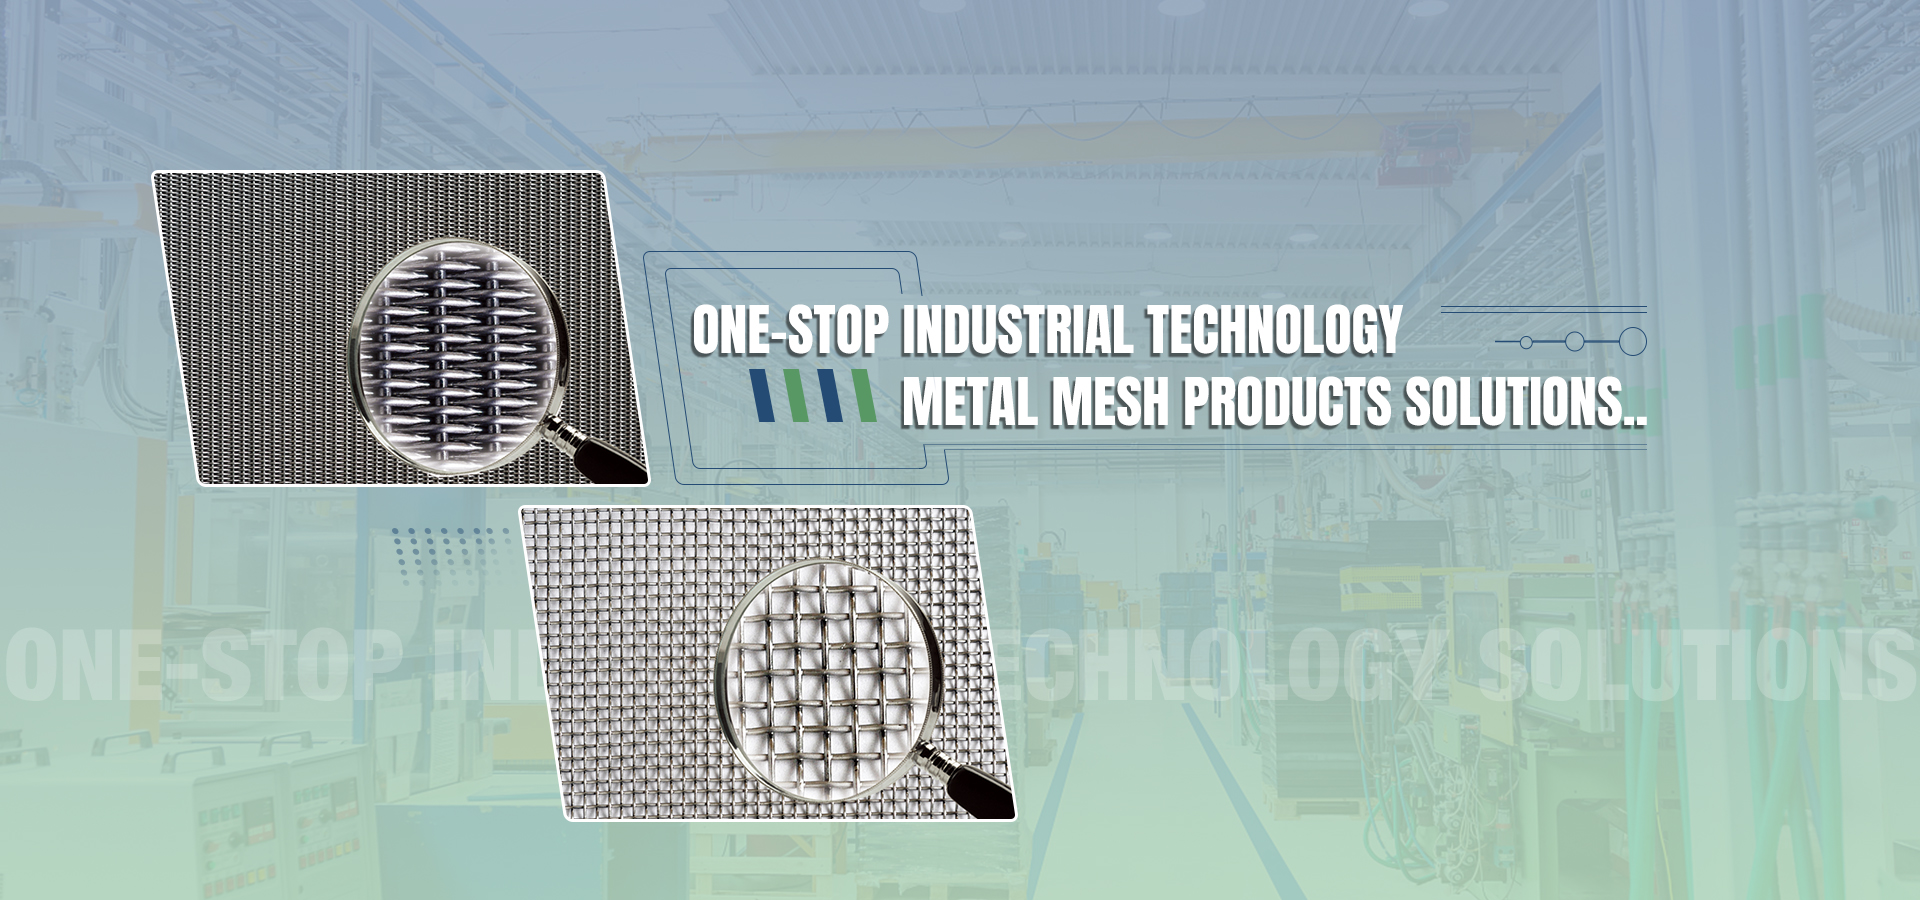 Expanded Metal Mesh, Woven Wire Cloth, 304 Wire Mesh - Sinotech